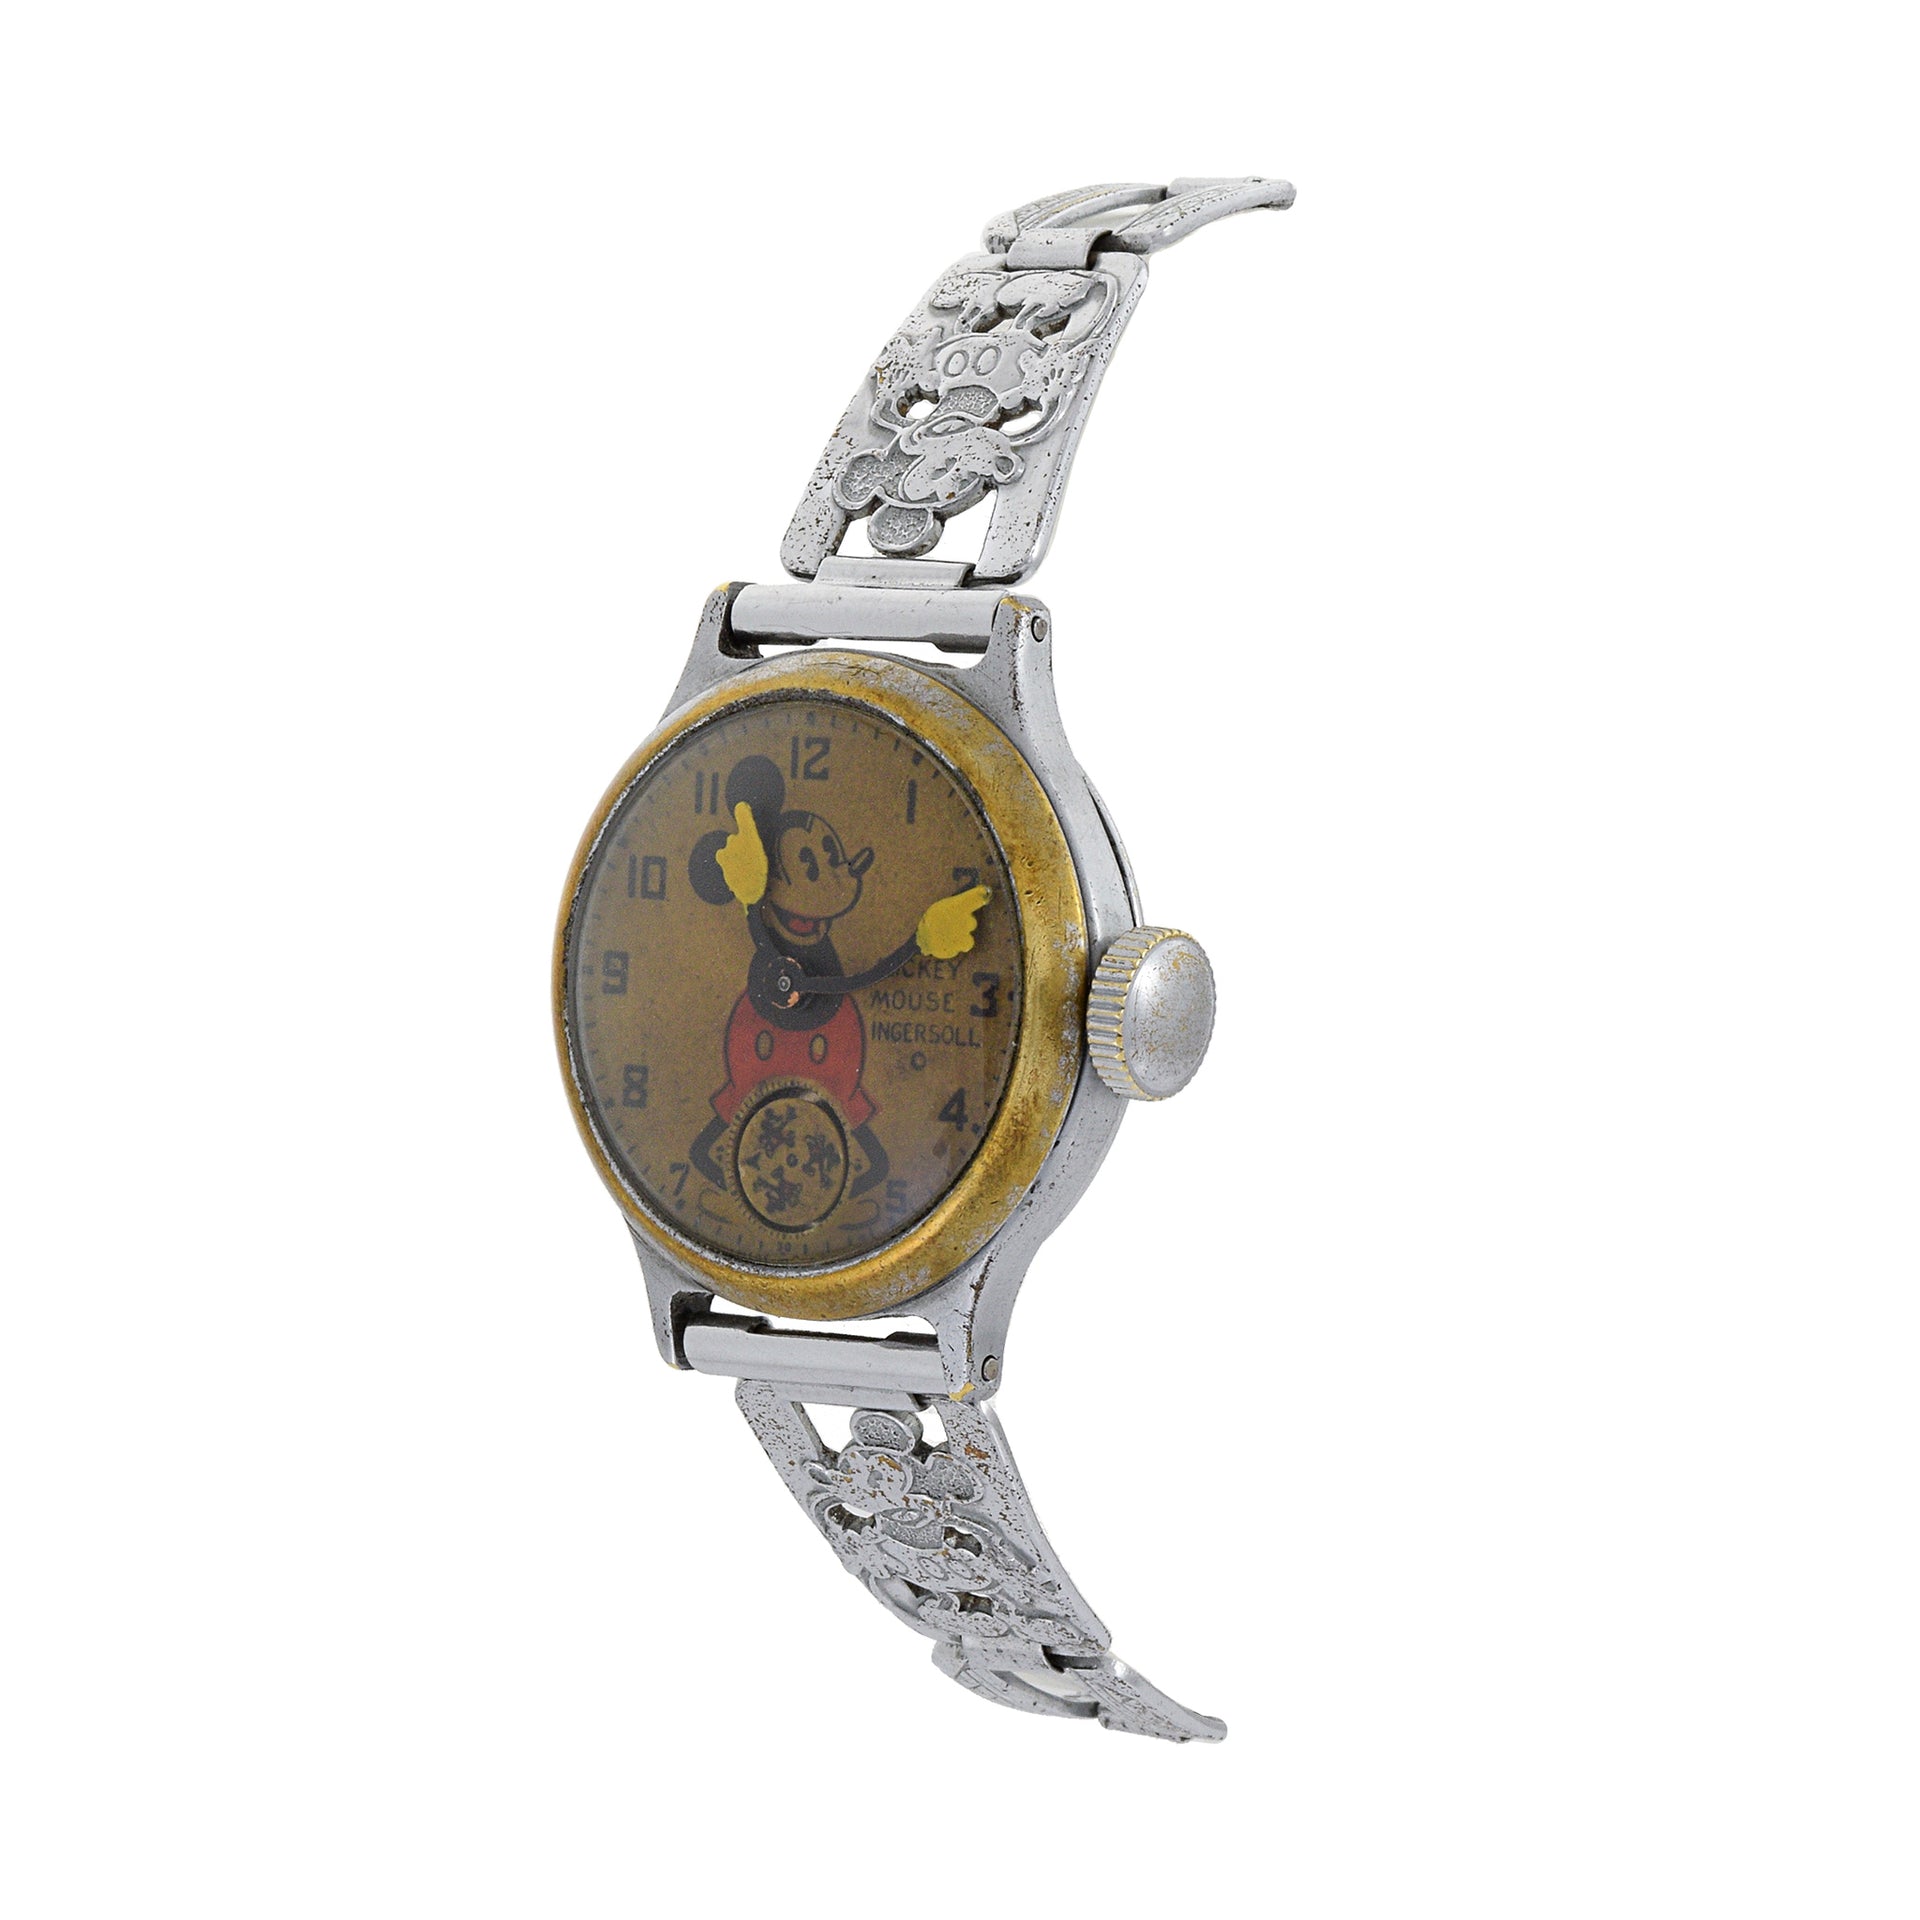 Extremely Rare 1930's Ingersoll Mickey Mouse Watch Two Tone Original Bracelet